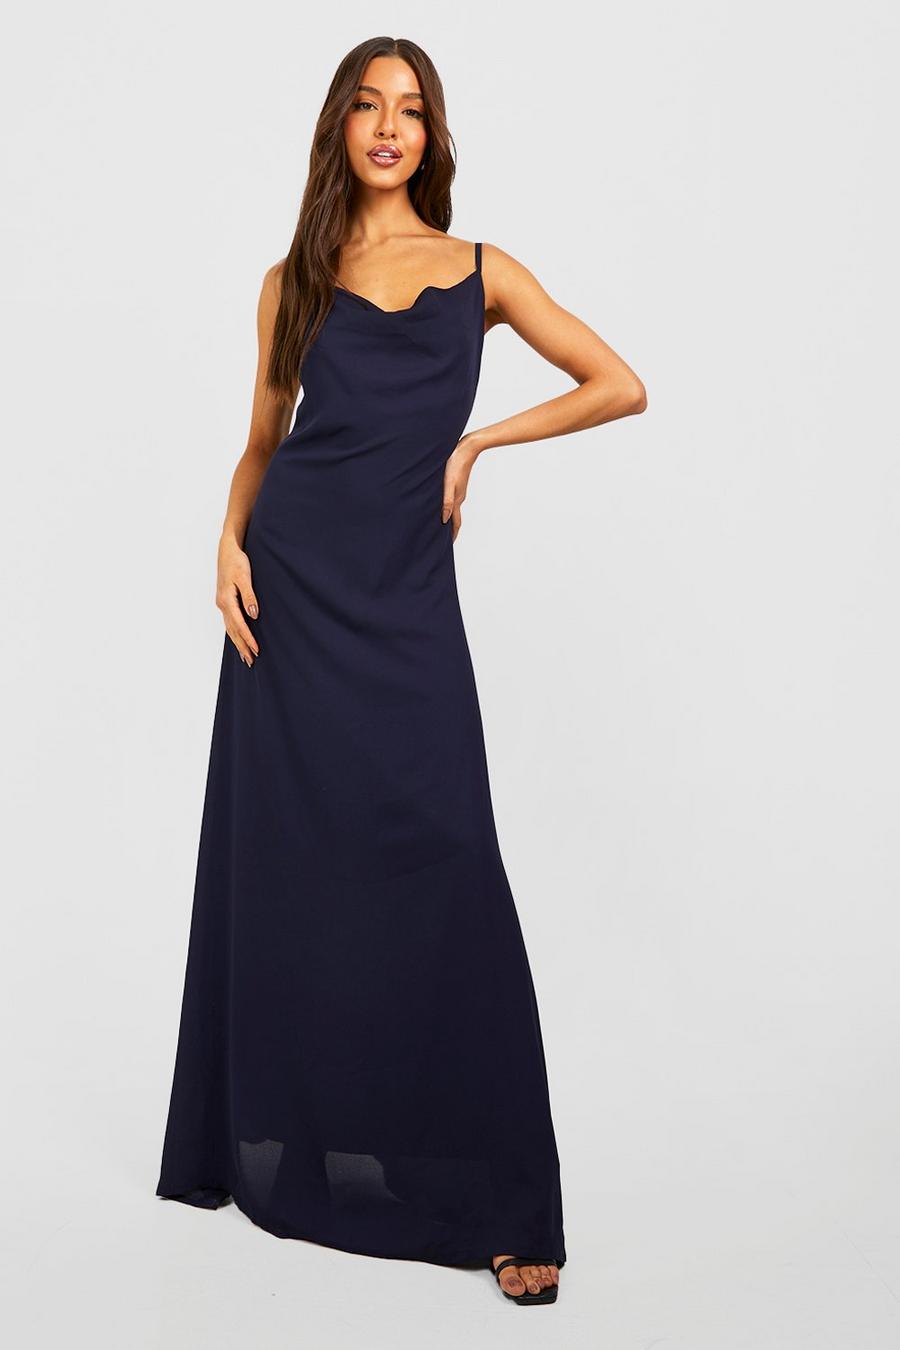 Navy Chiffon Cowl Strappy Maxi Dress image number 1